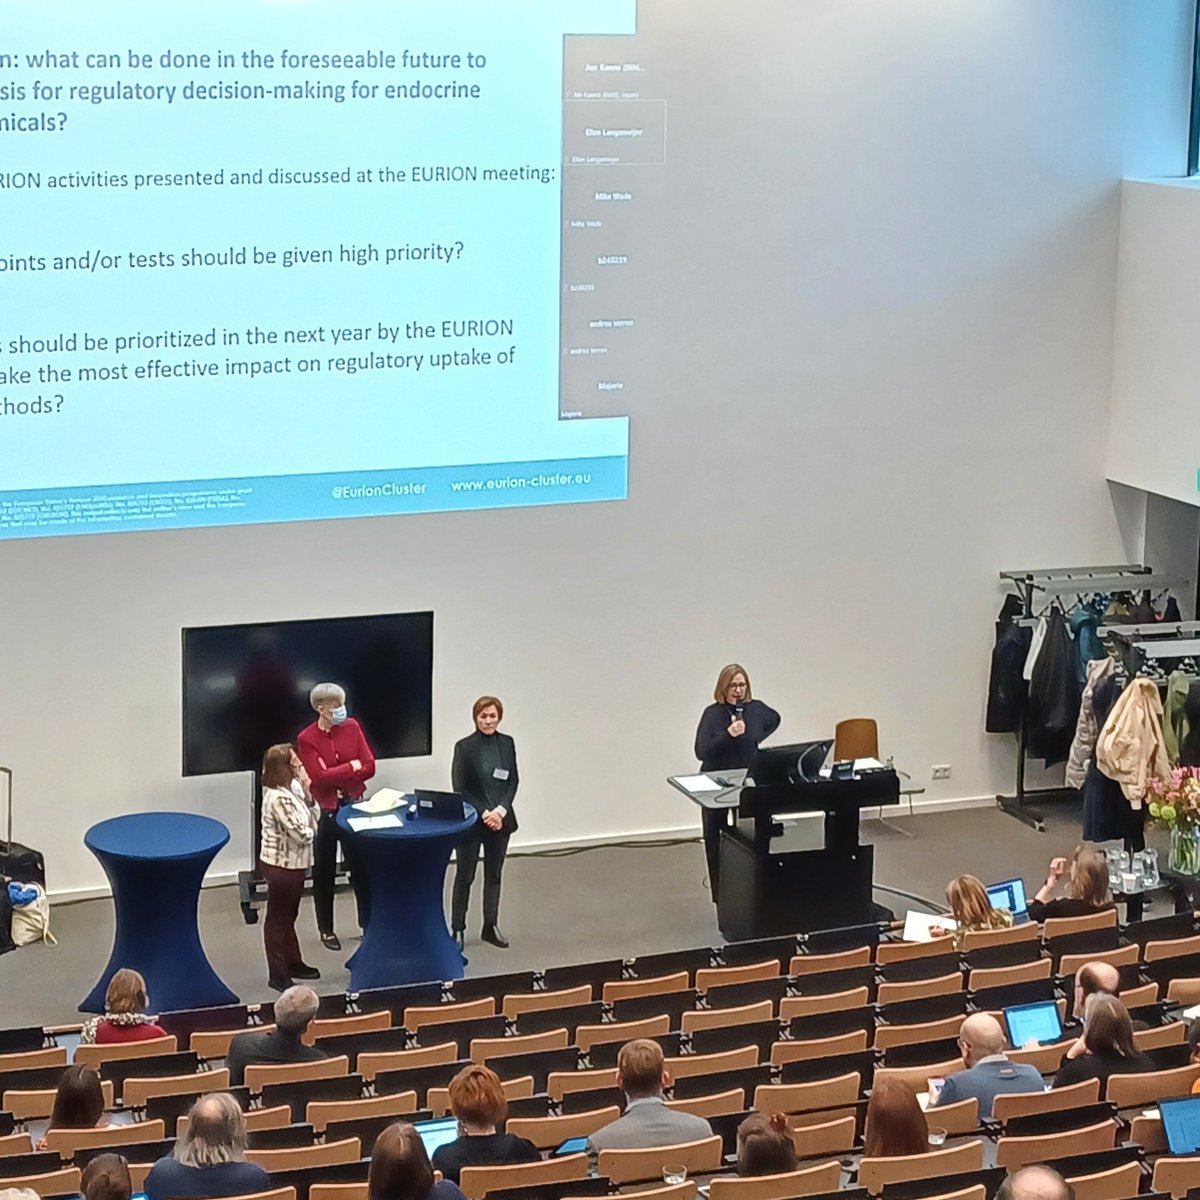 We are about to start the final session of the EURION Annual Meeting 2023. International Advisory Panel feedback & discussion led by Sharon Munn (JCR) is very valuable to the #EURION cluster collaboration and impact. #EDCs #H2020 @HorizonEU @EU_ScienceHub